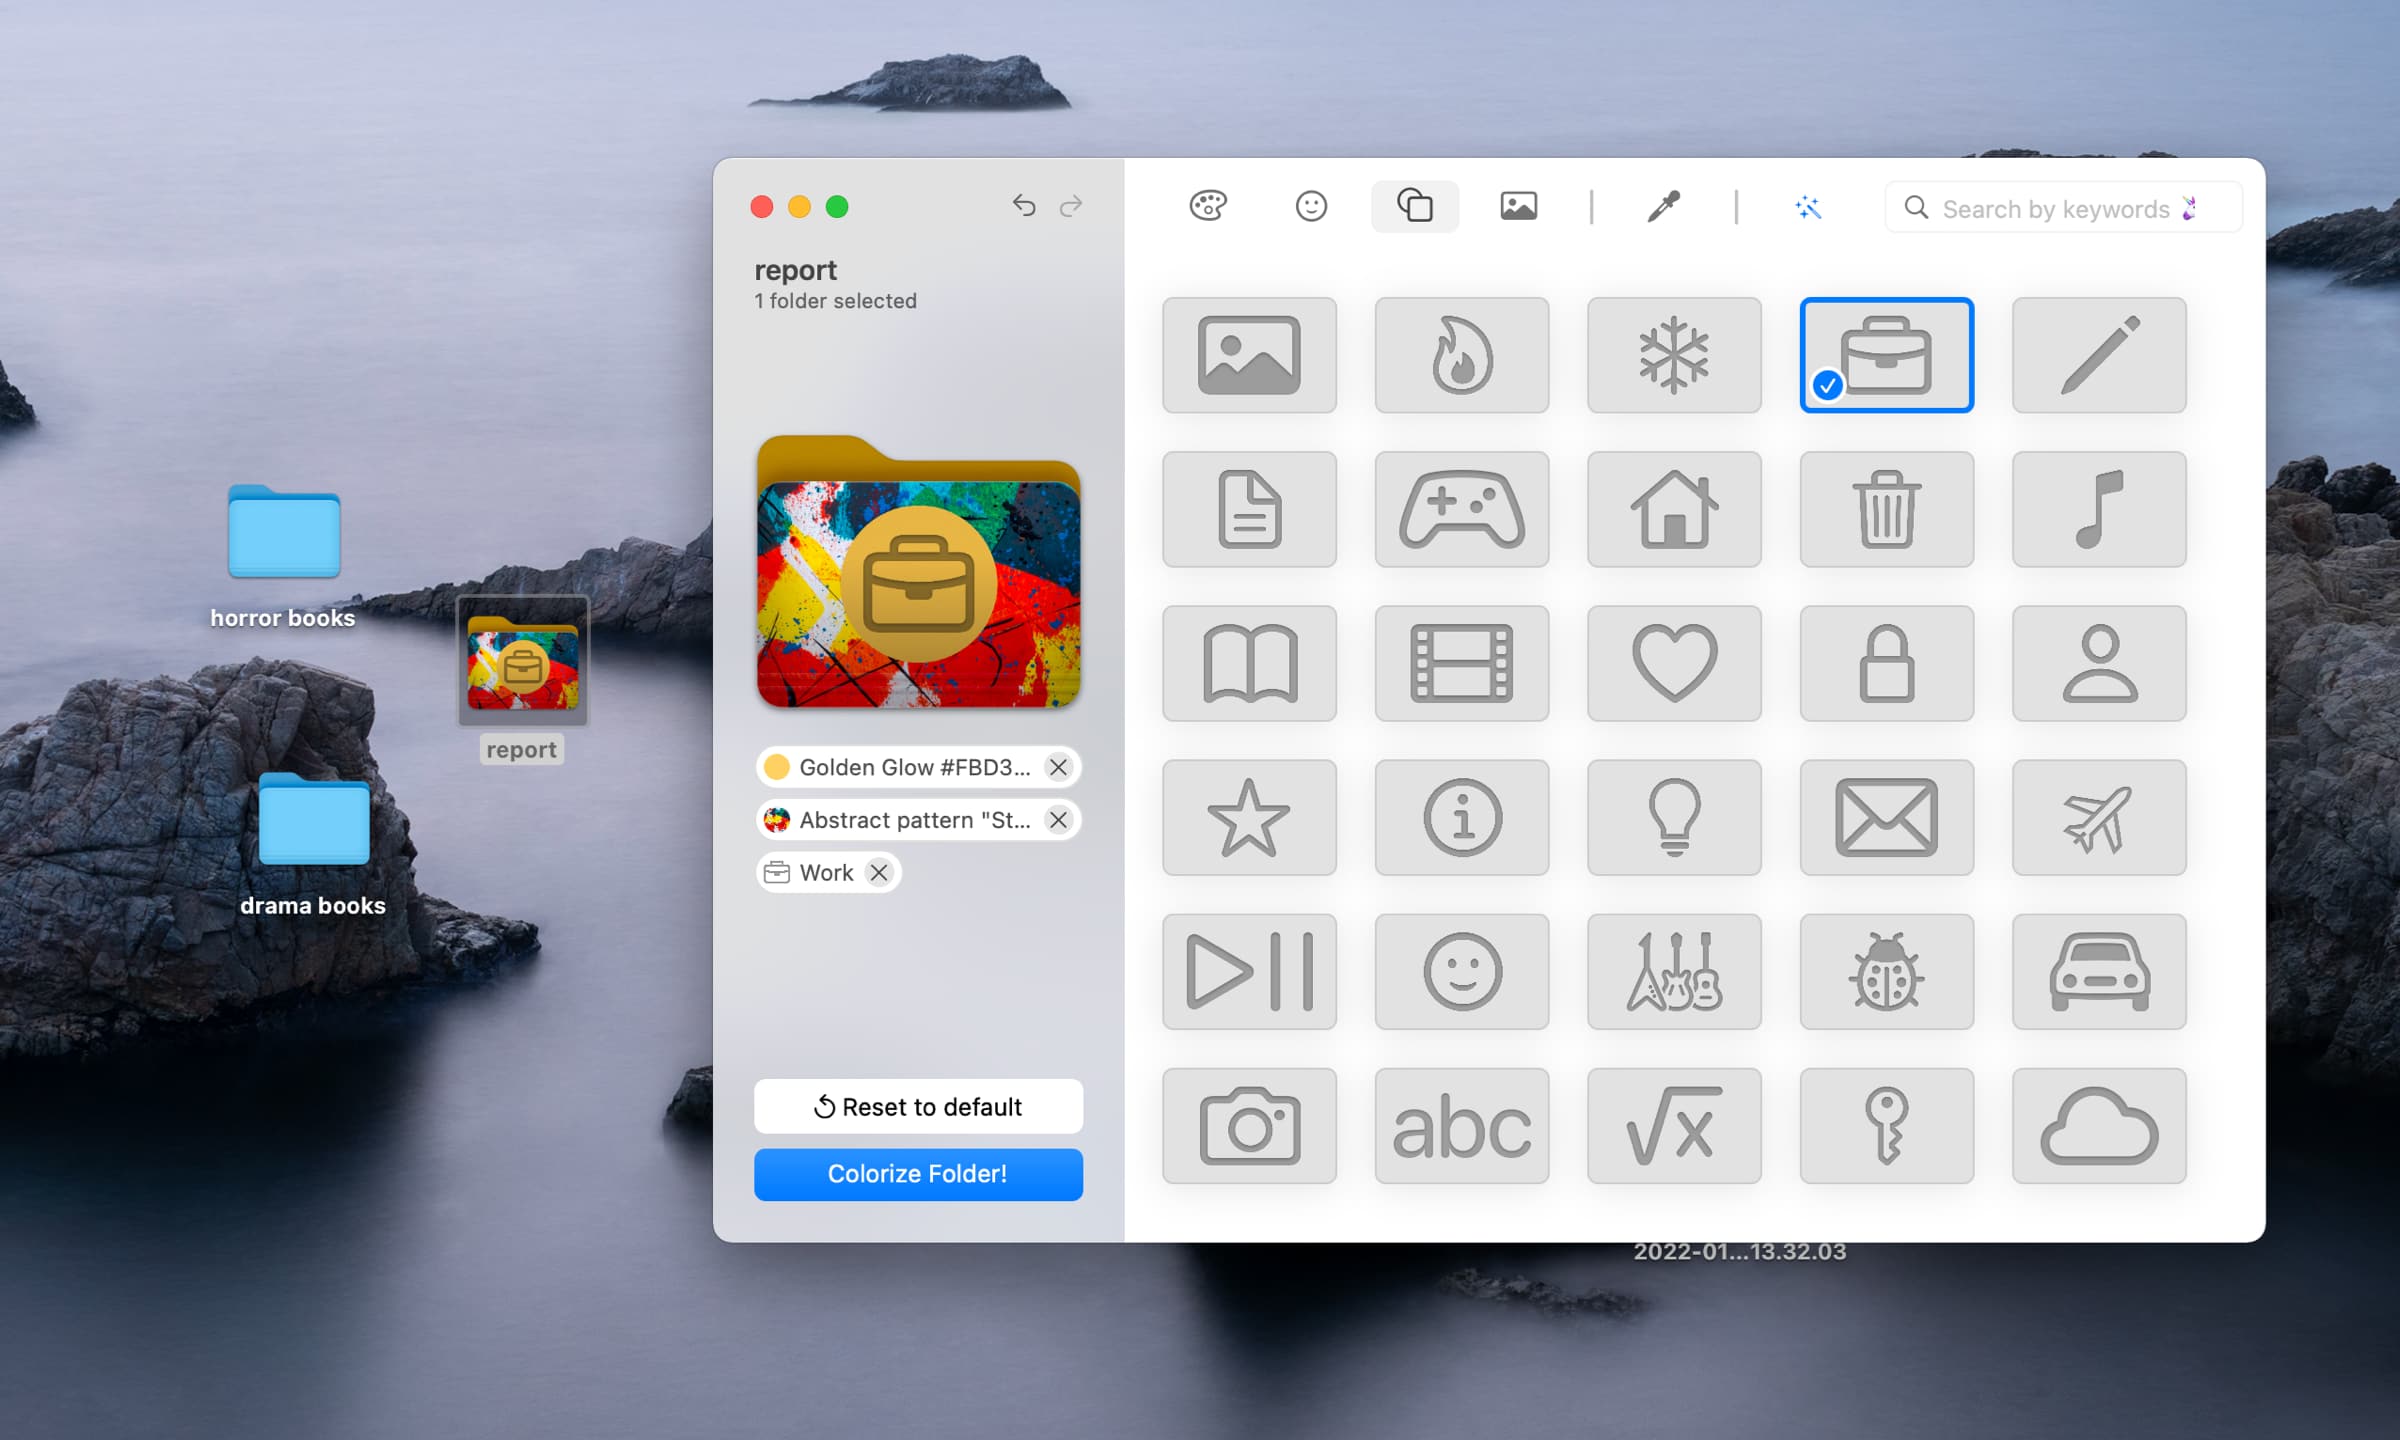 A marketing image from Softorino showcasing customizing folder icons with symbols and decals in its Folder Colorizer app for macOS